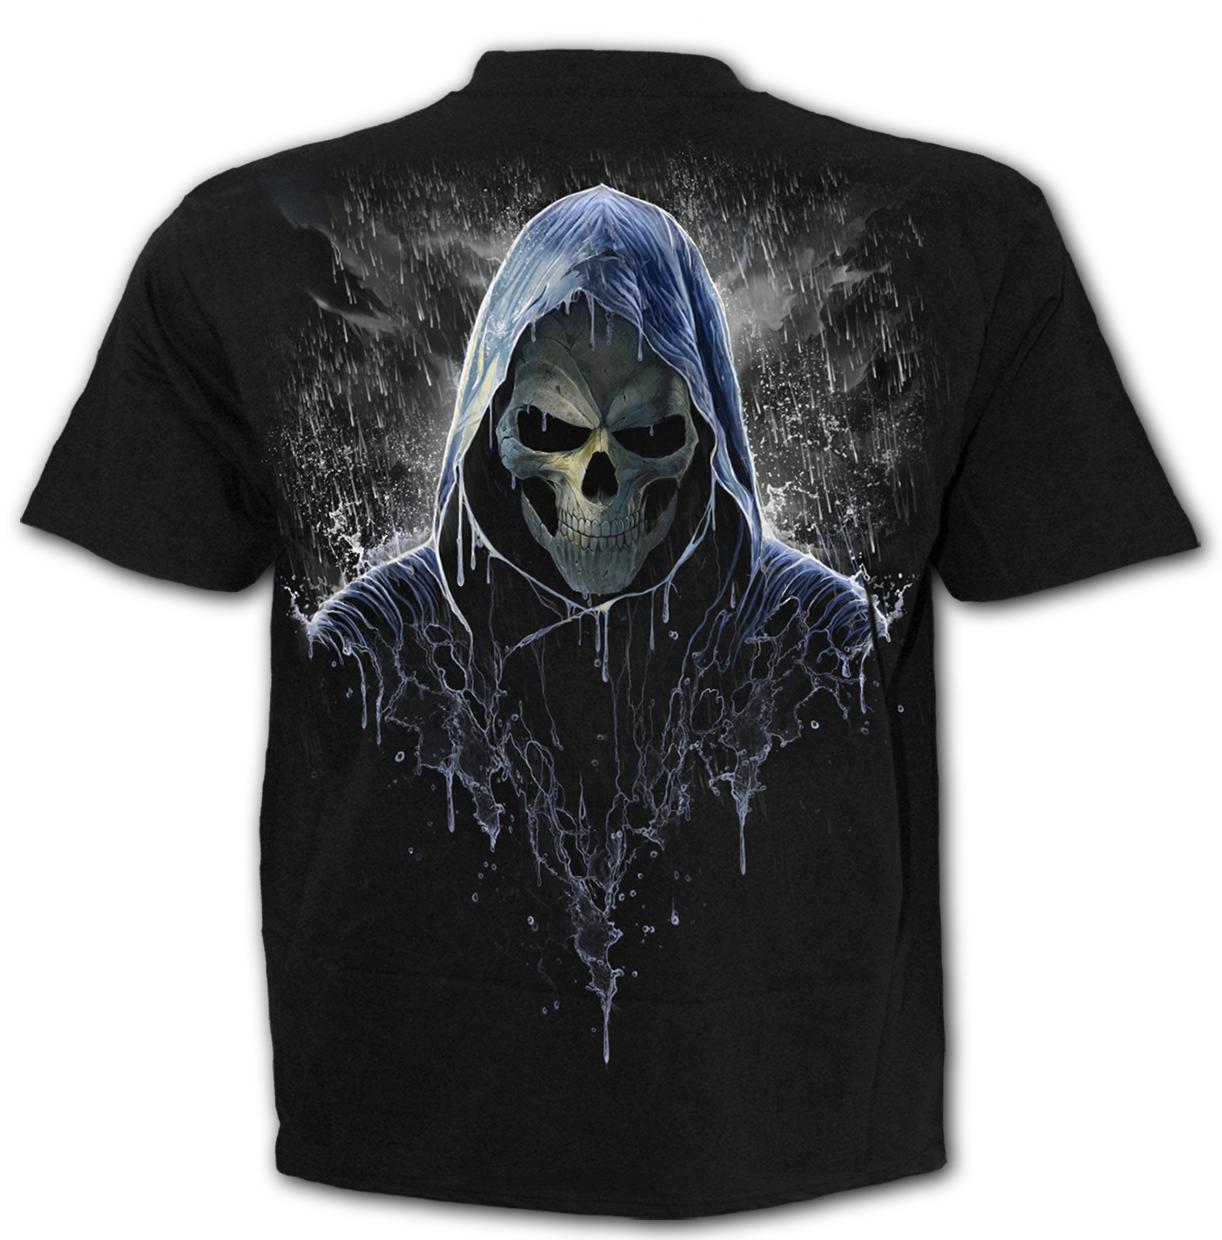 Reaping In The Rain - T-Shirt Black